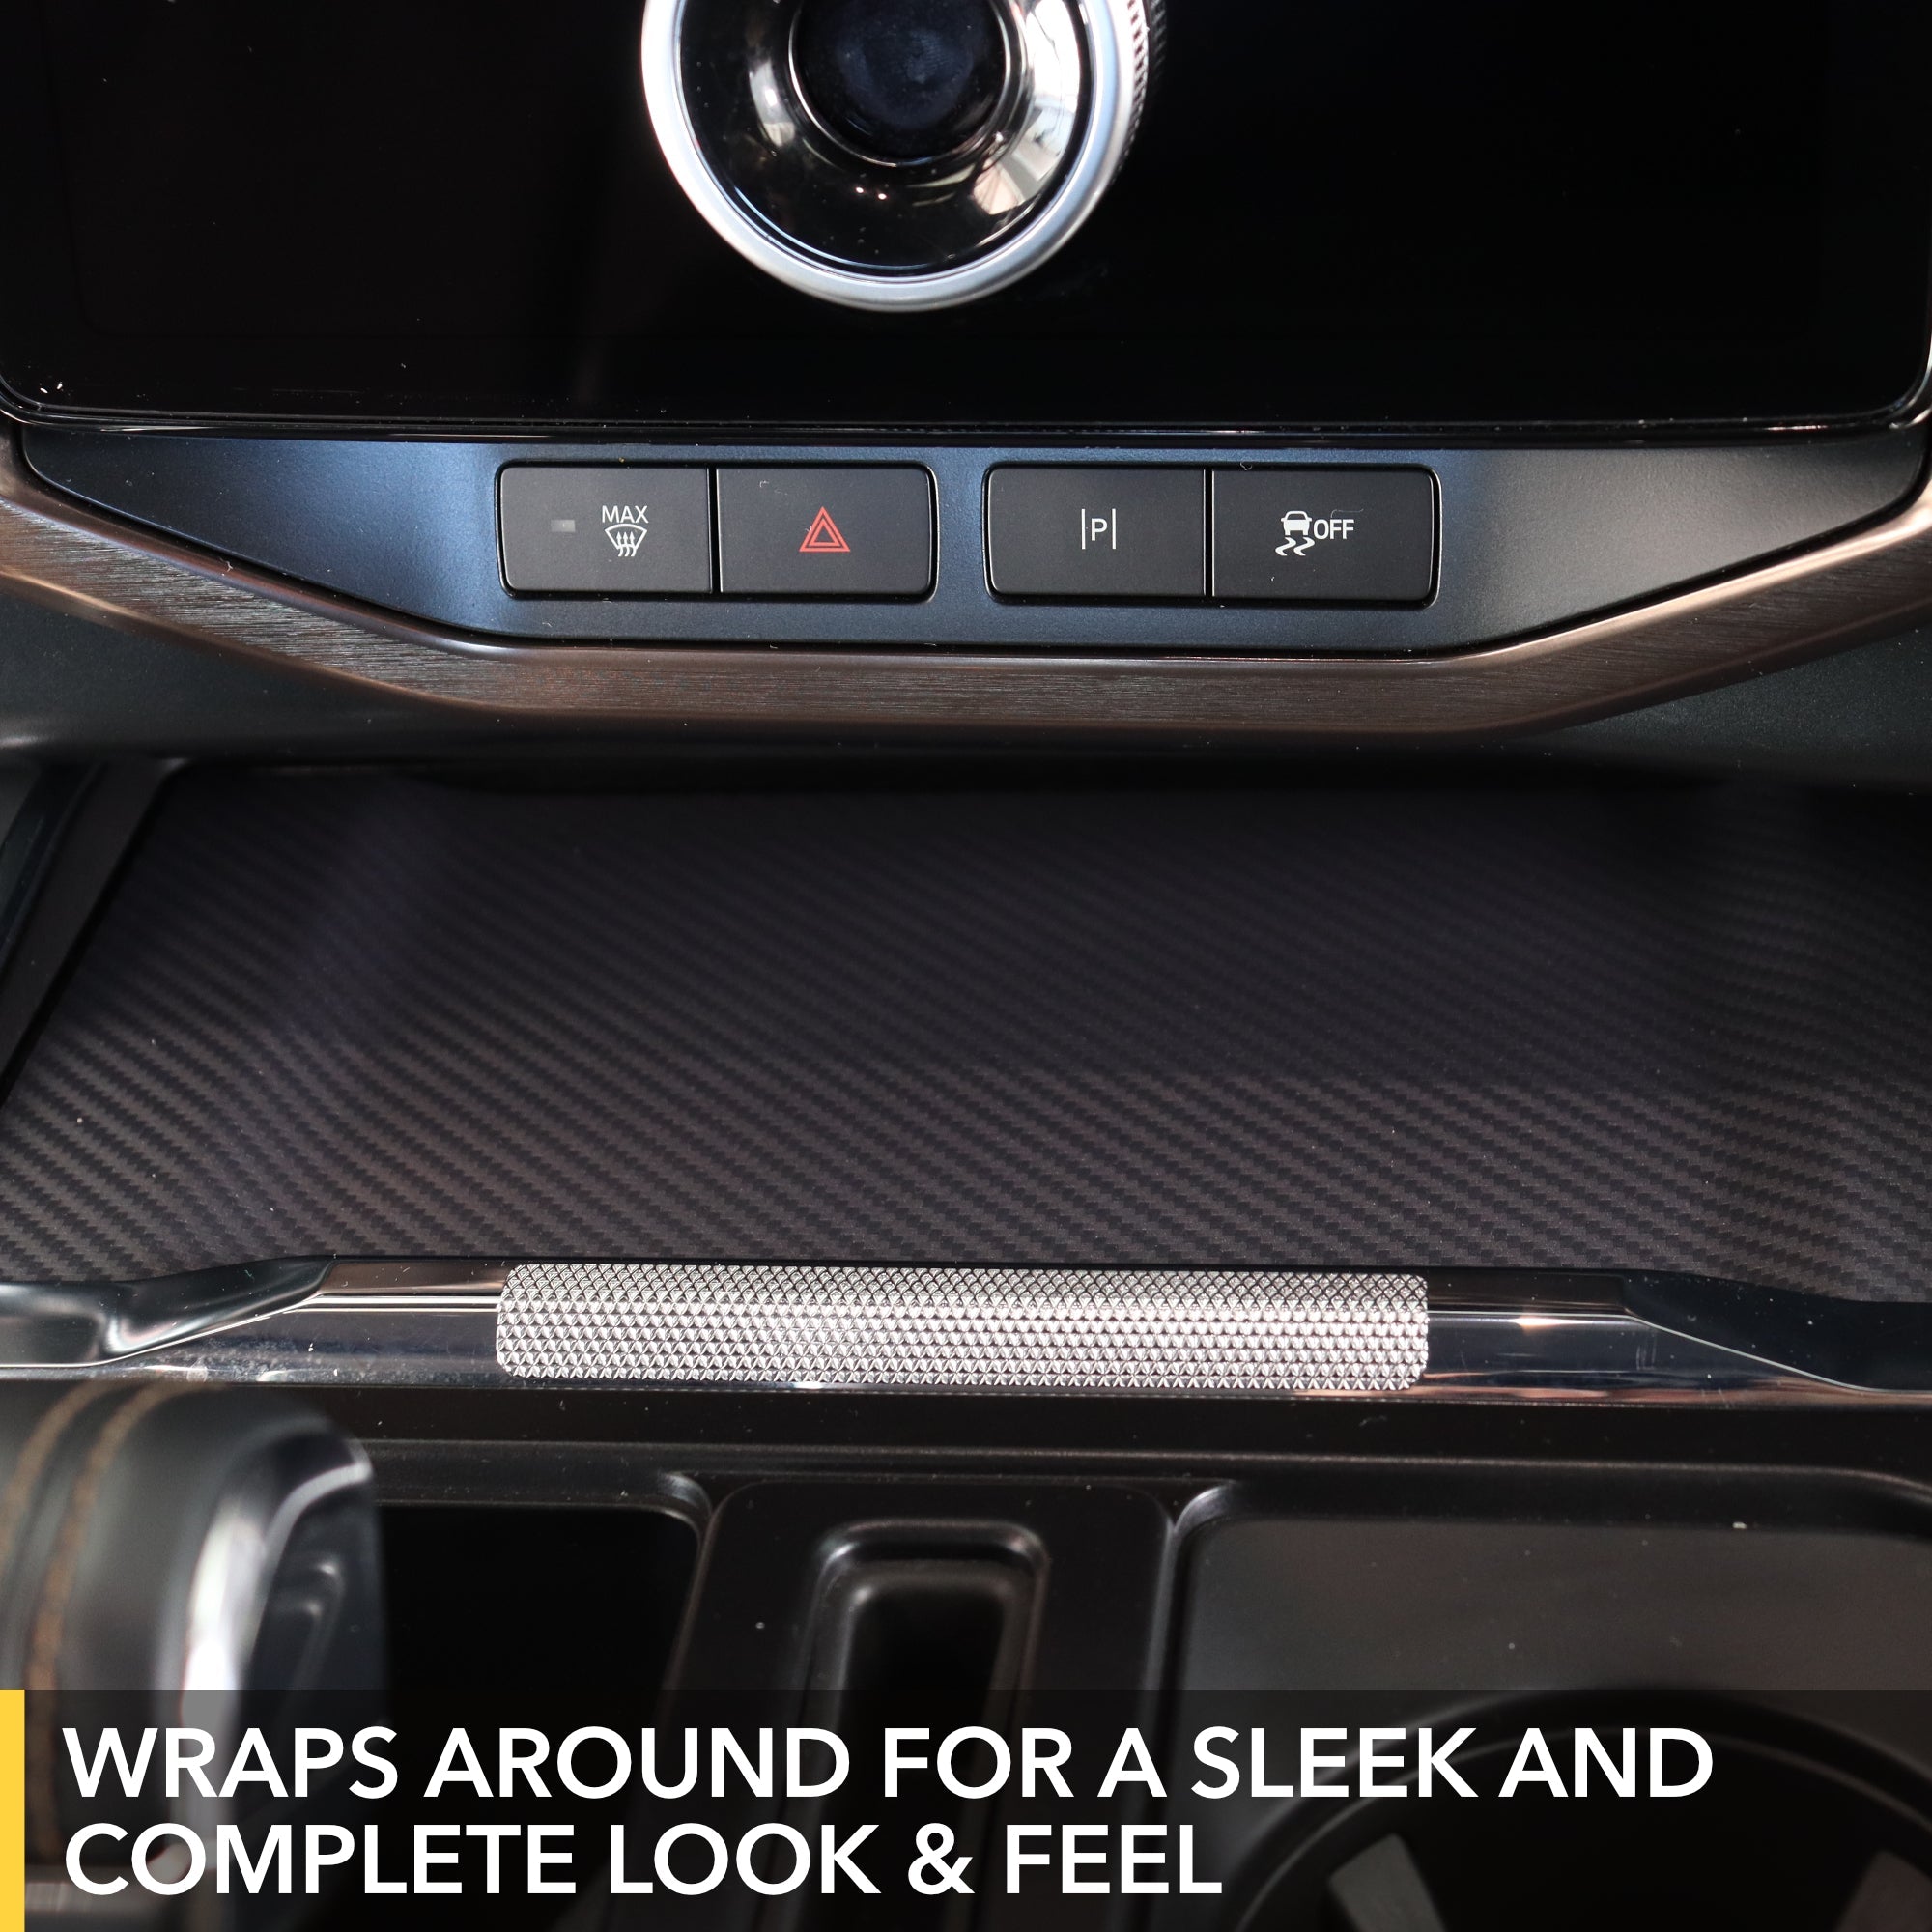 Interior Wrap for Ford F-150 Lightning - includes Dash, Door Trims and Phone Charger Lid-3